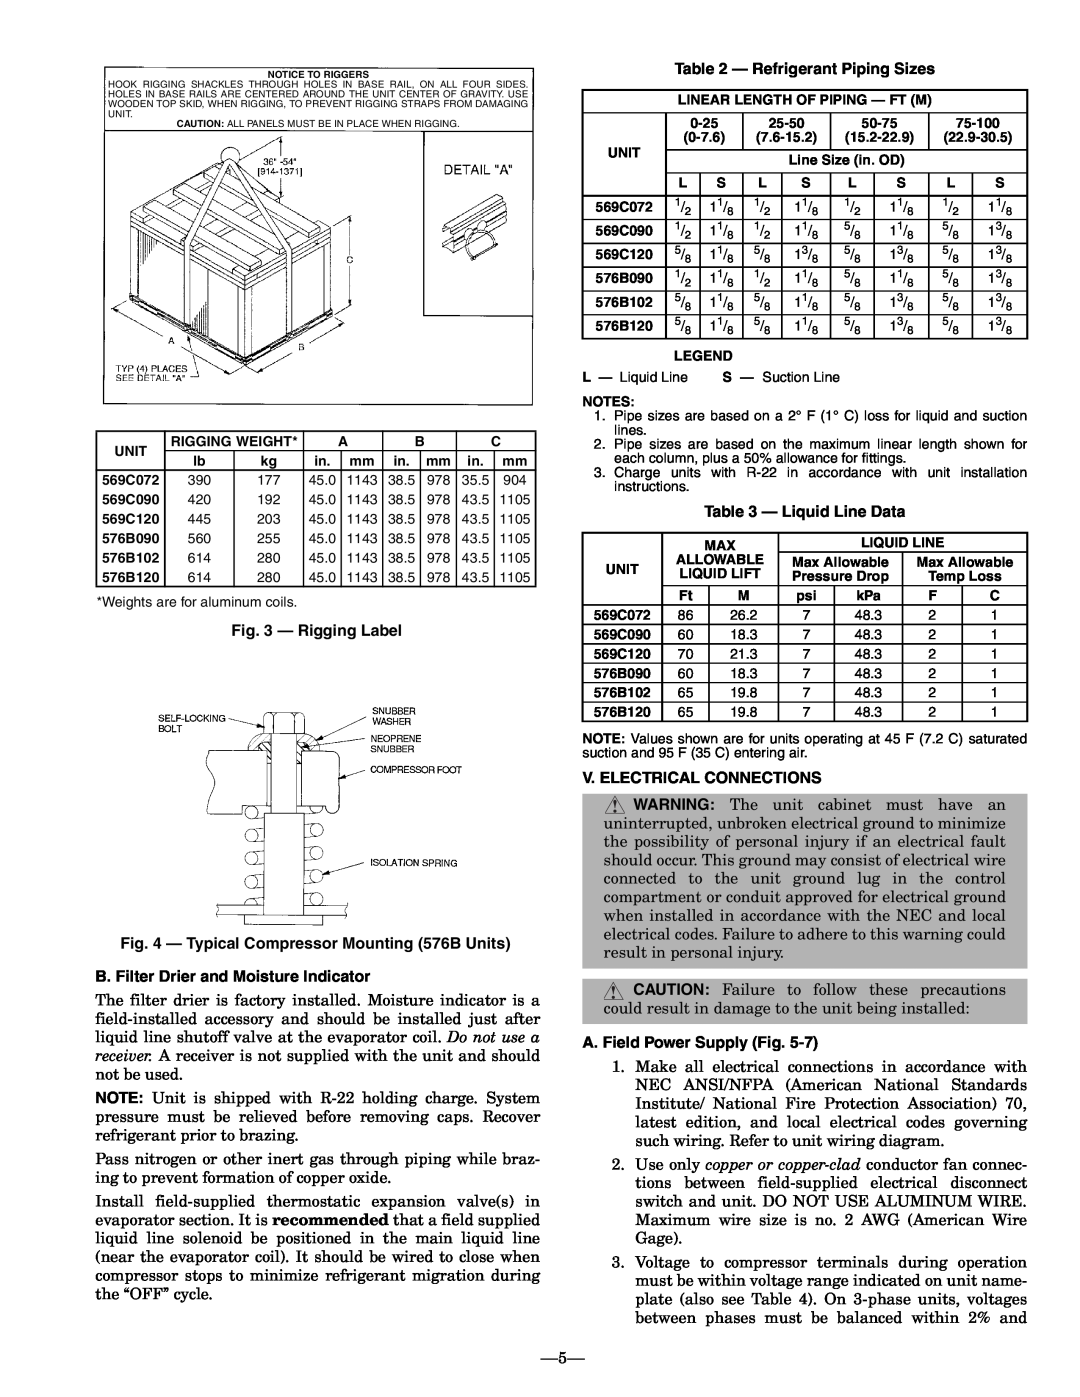 Bryant 576b Rigging Label, Refrigerant Piping Sizes, Liquid Line Data, V. Electrical Connections, A.Field Power Supply Fig 